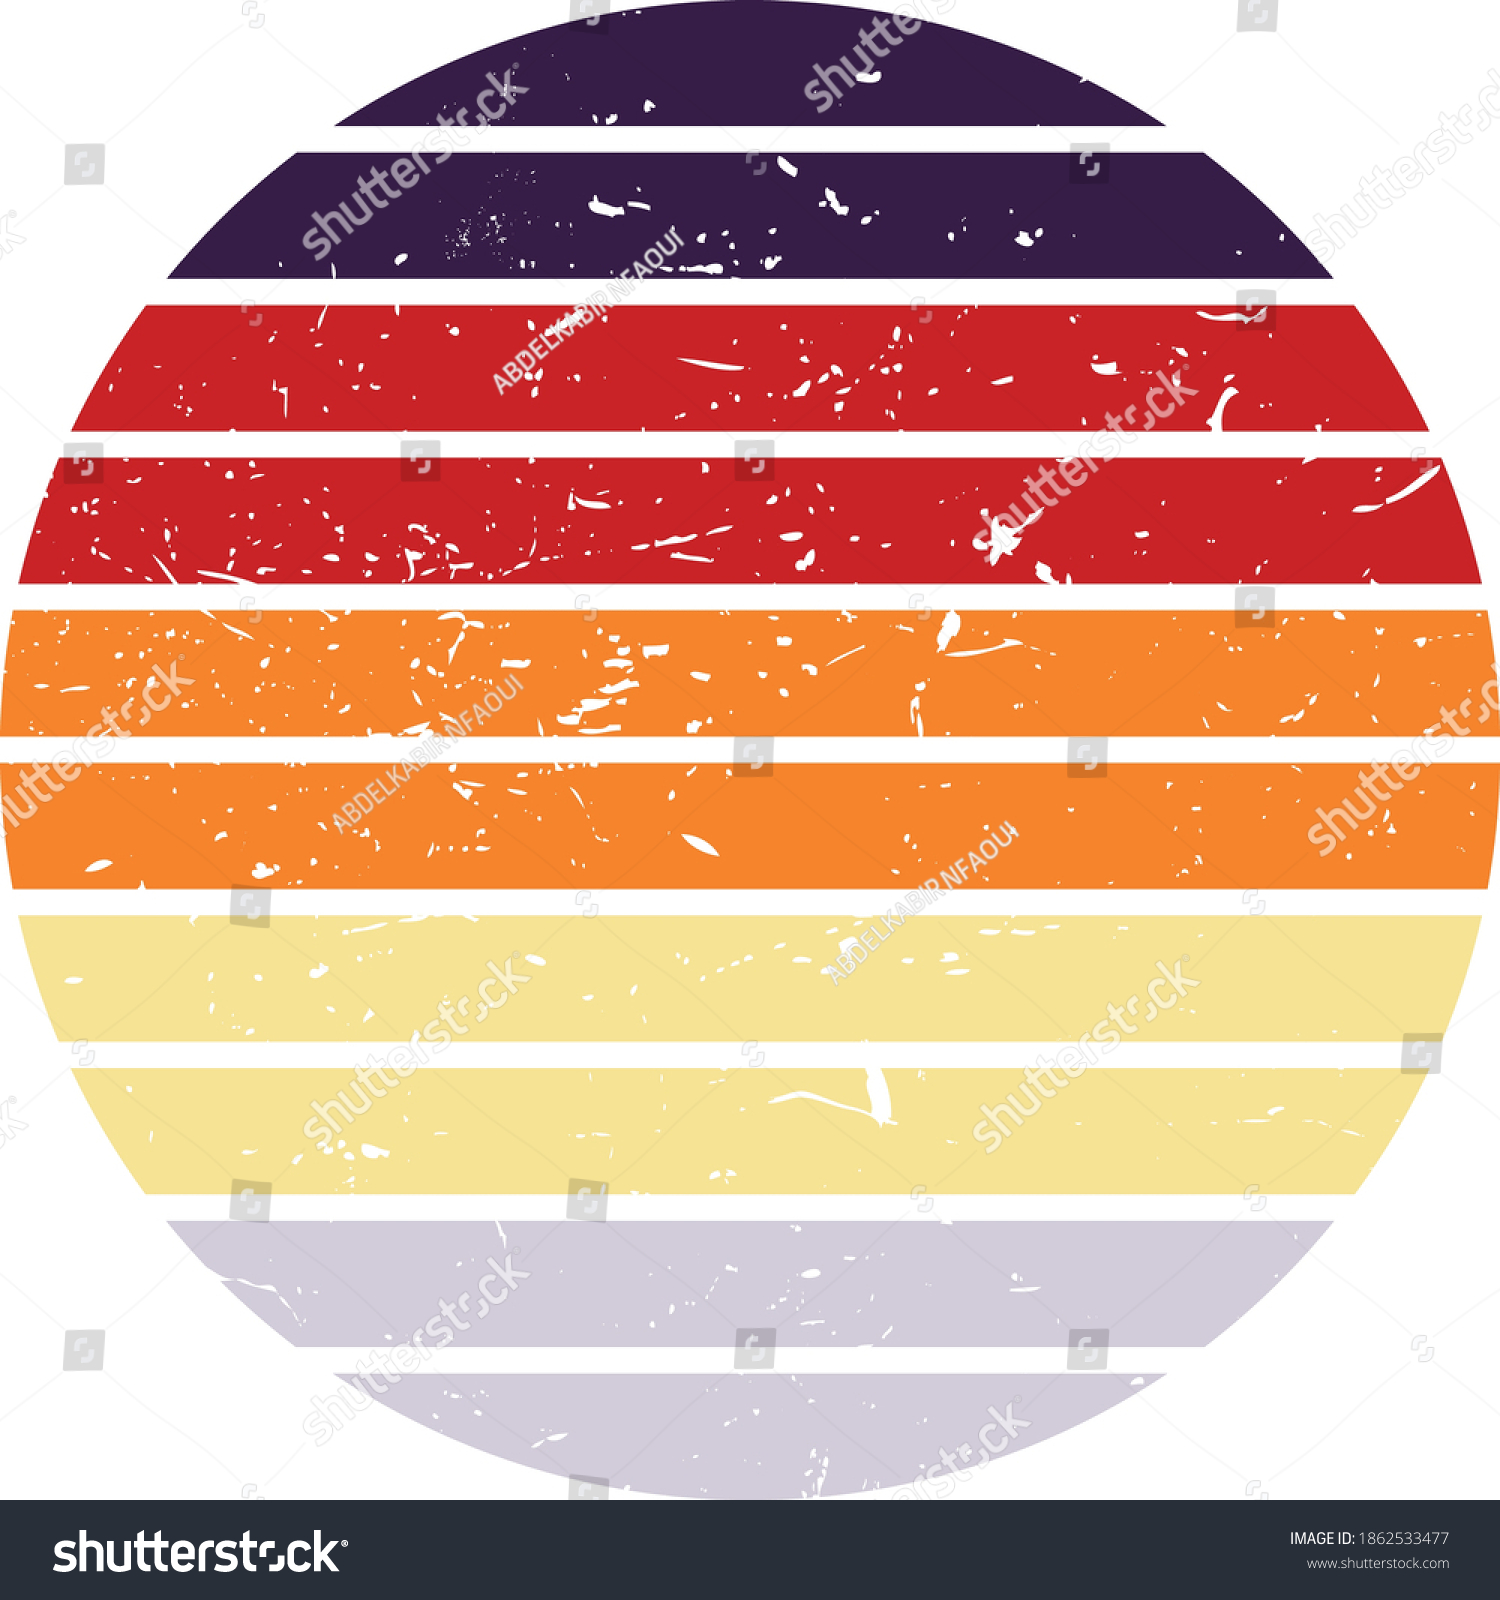 SVG of Vintage Retro Sunset Striped Circle Art you can edit and use in your projects (t-shirt,POD,book cover…). svg